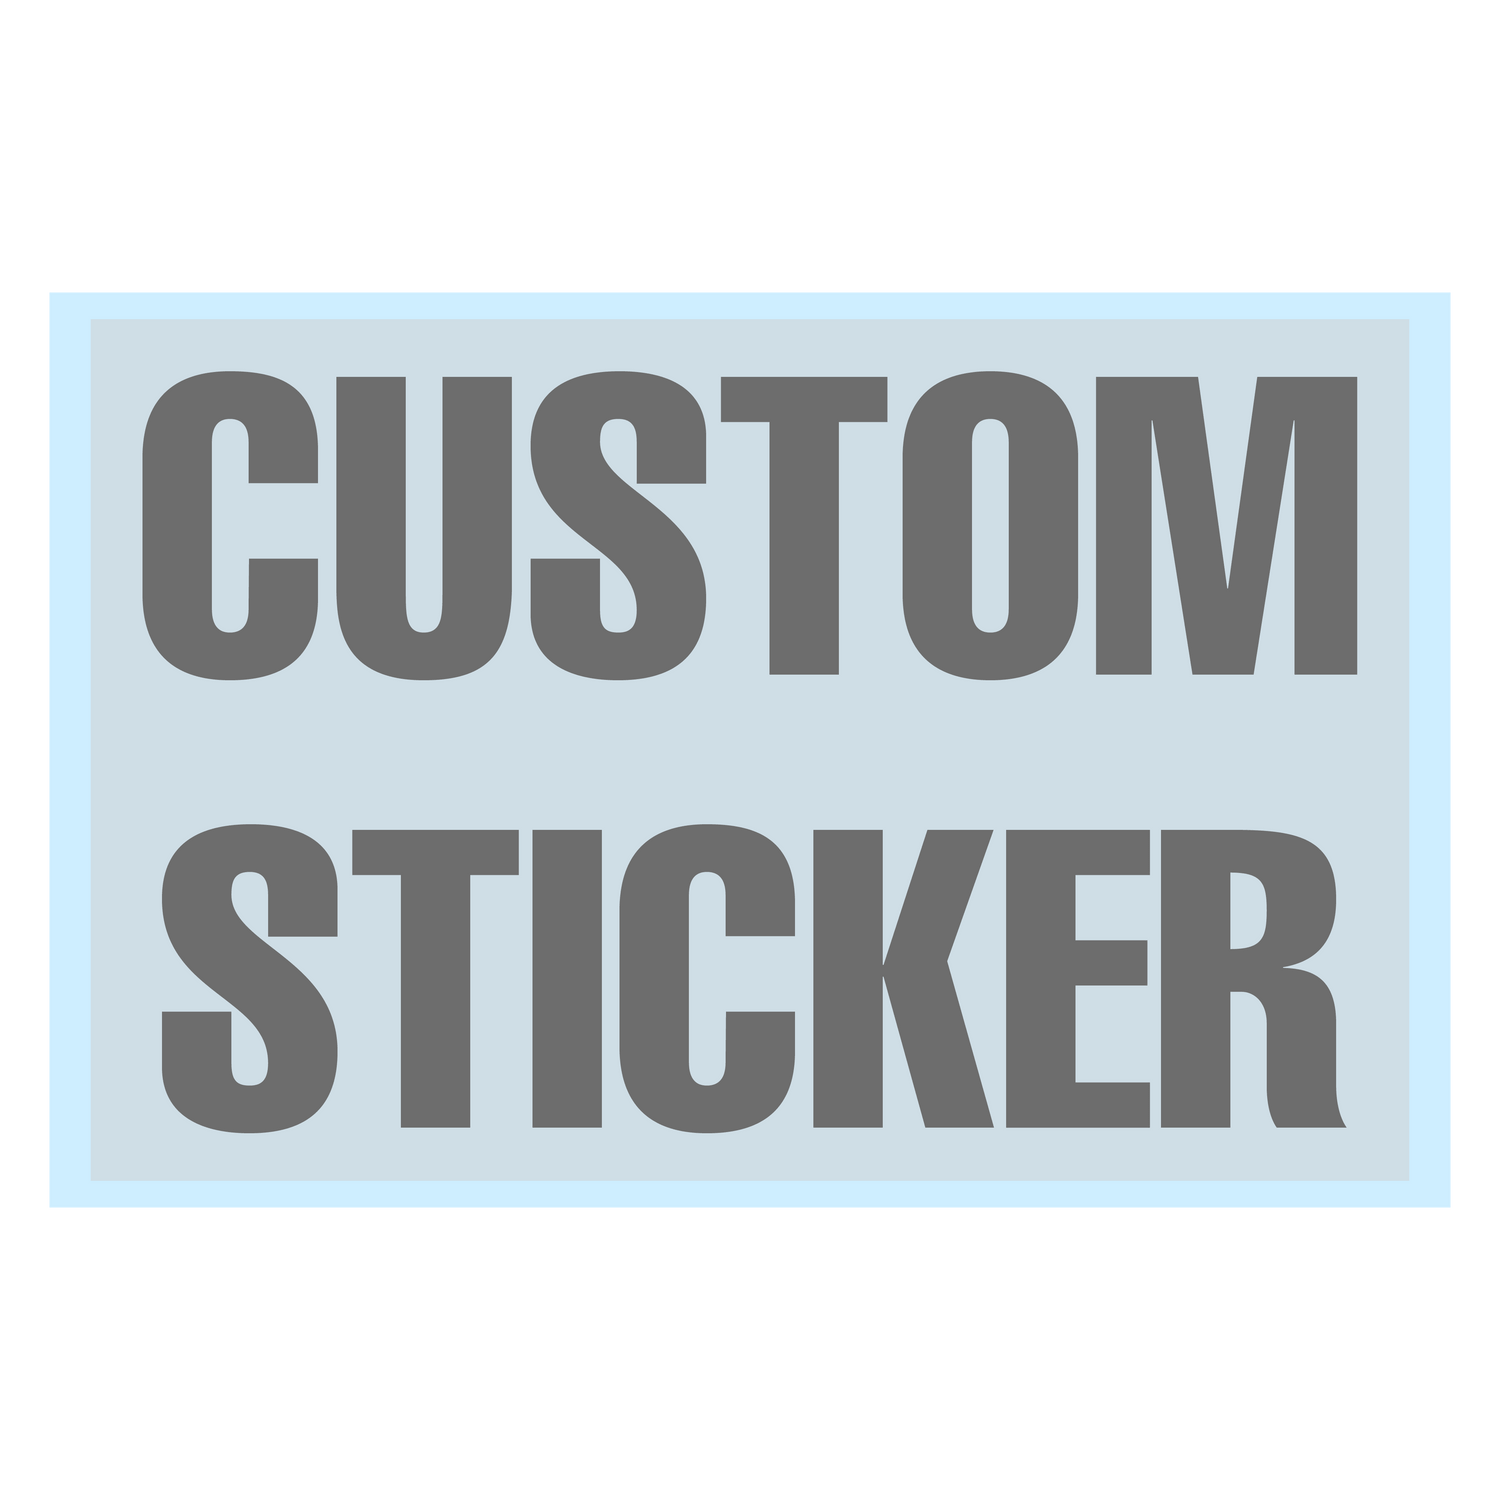 decal instructions step 1: What you will receive... Your decal sticker will be sandwiched between a blue or white backing paper and a clear plastic application tape.